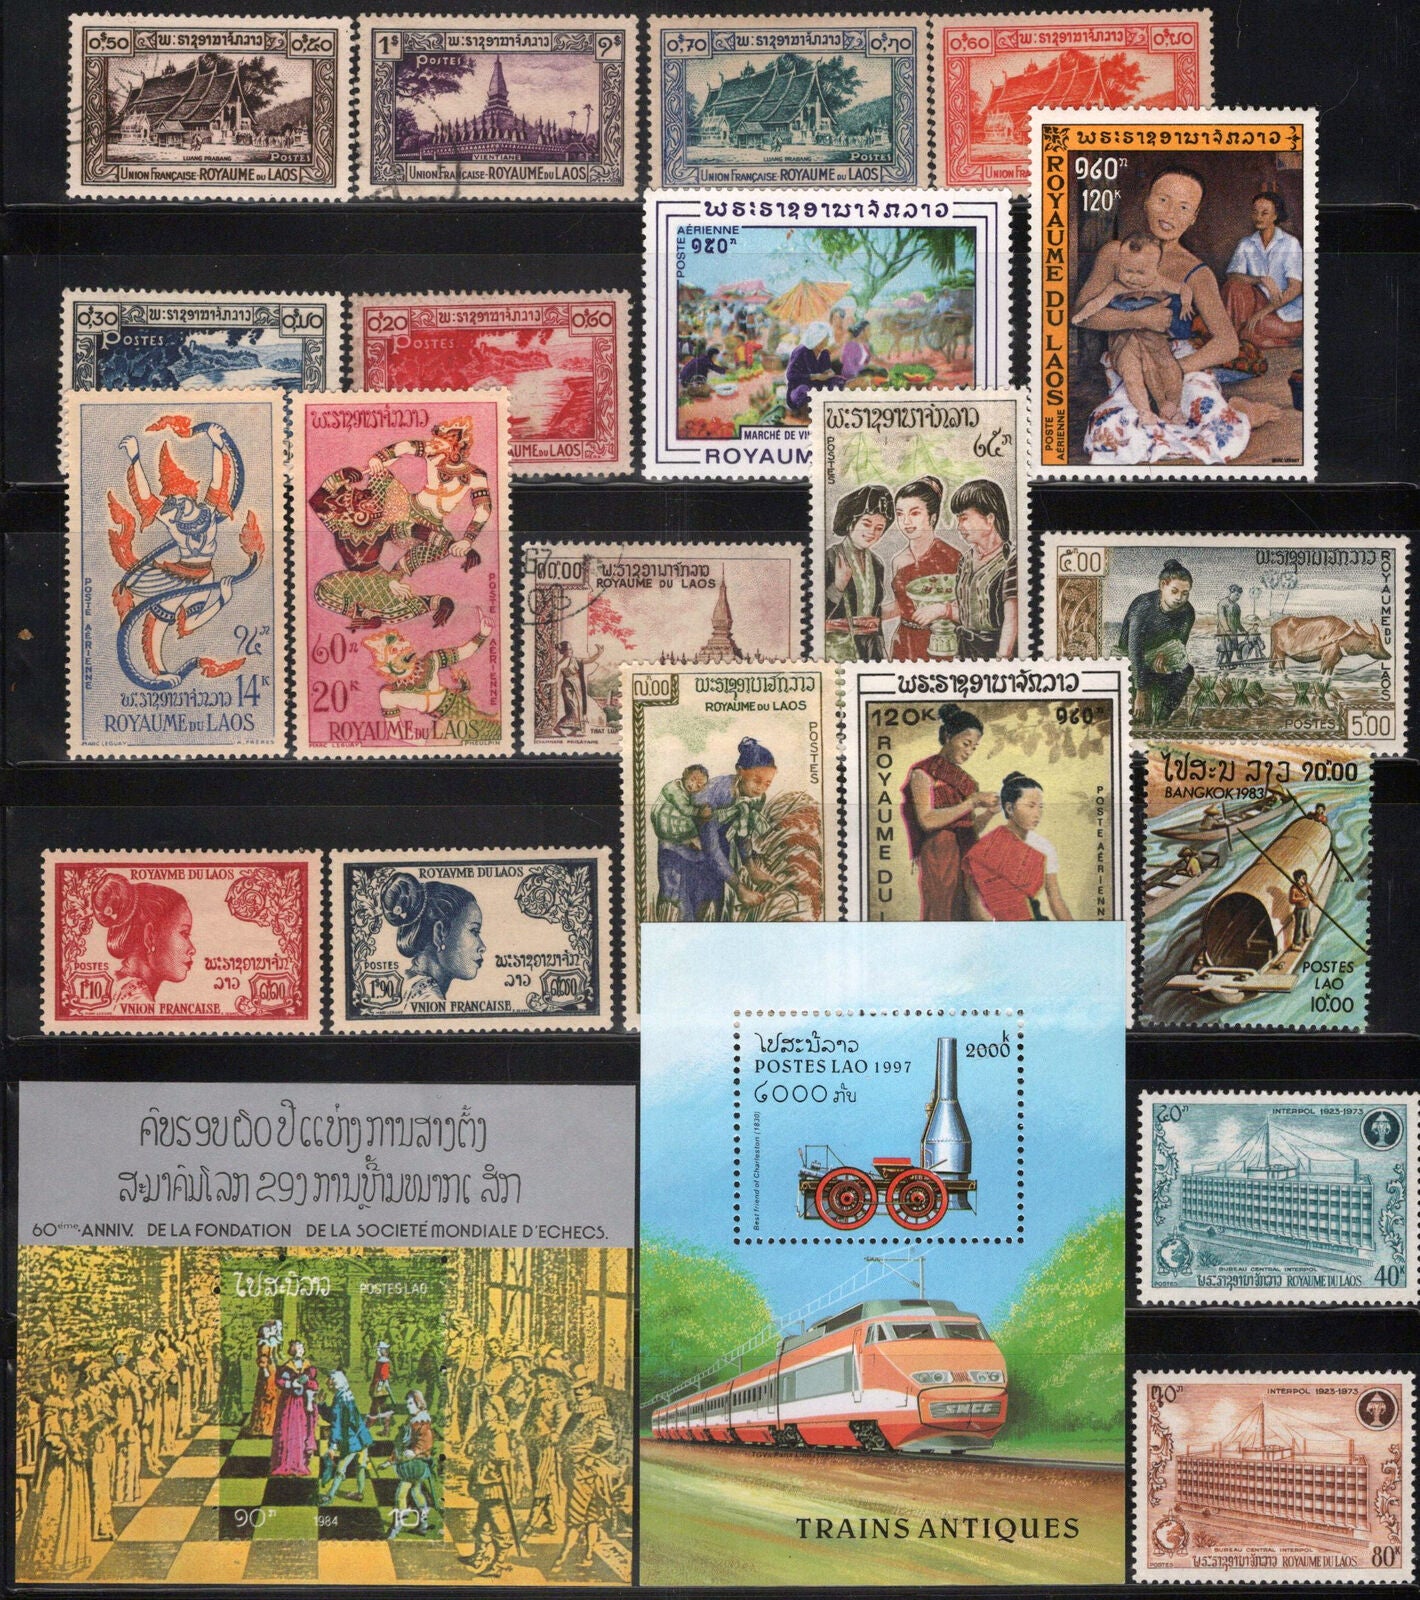 ZAYIX Laos Stamp Collection Mint/Used Elephants Farm Animals Trains 071423S153